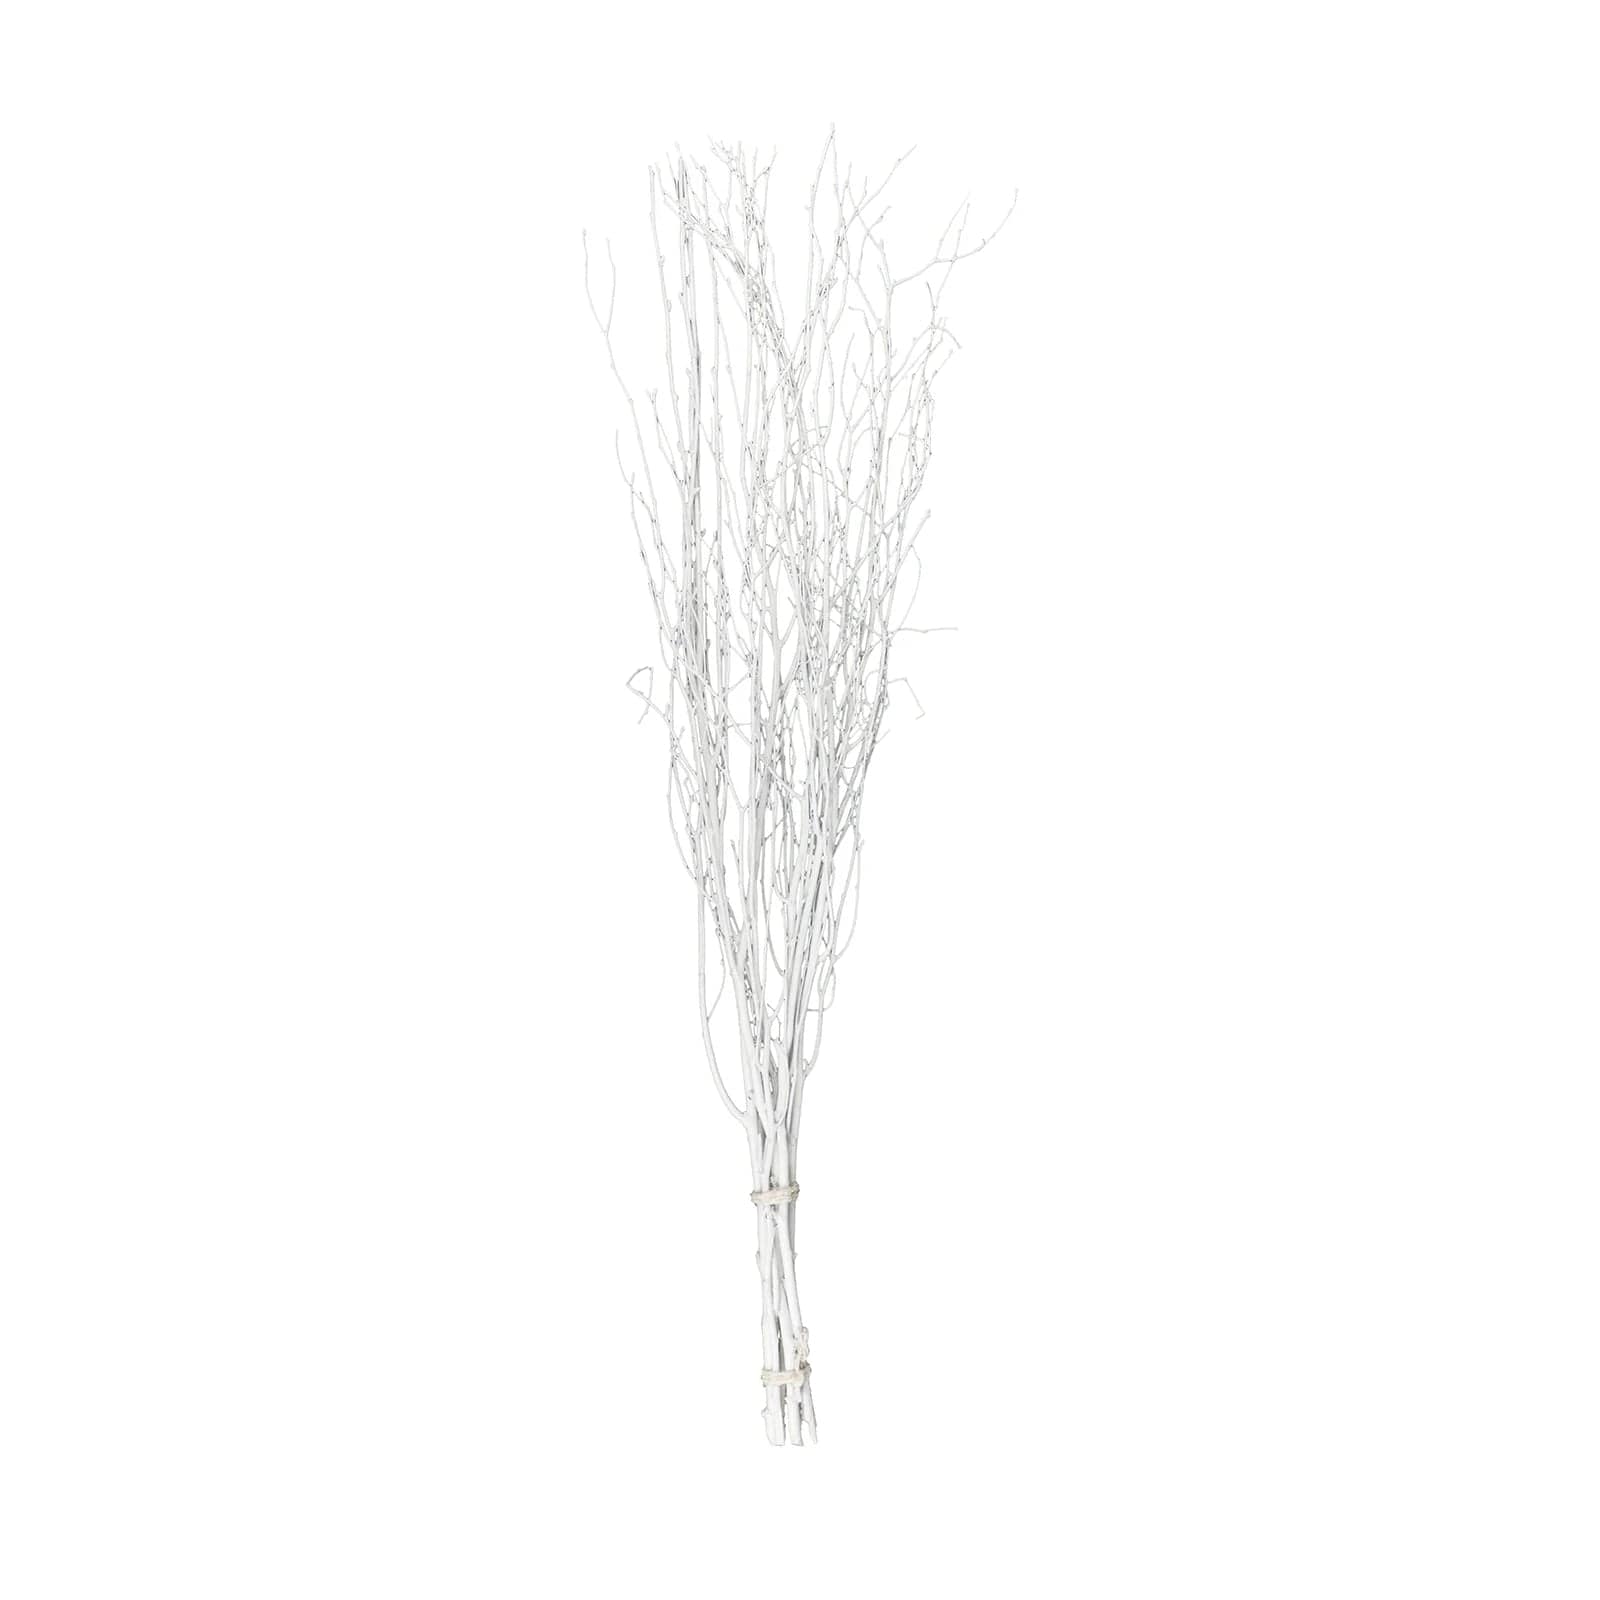 6 Decorative 46 in Extra Long Birch Tree Branches Vase Fillers